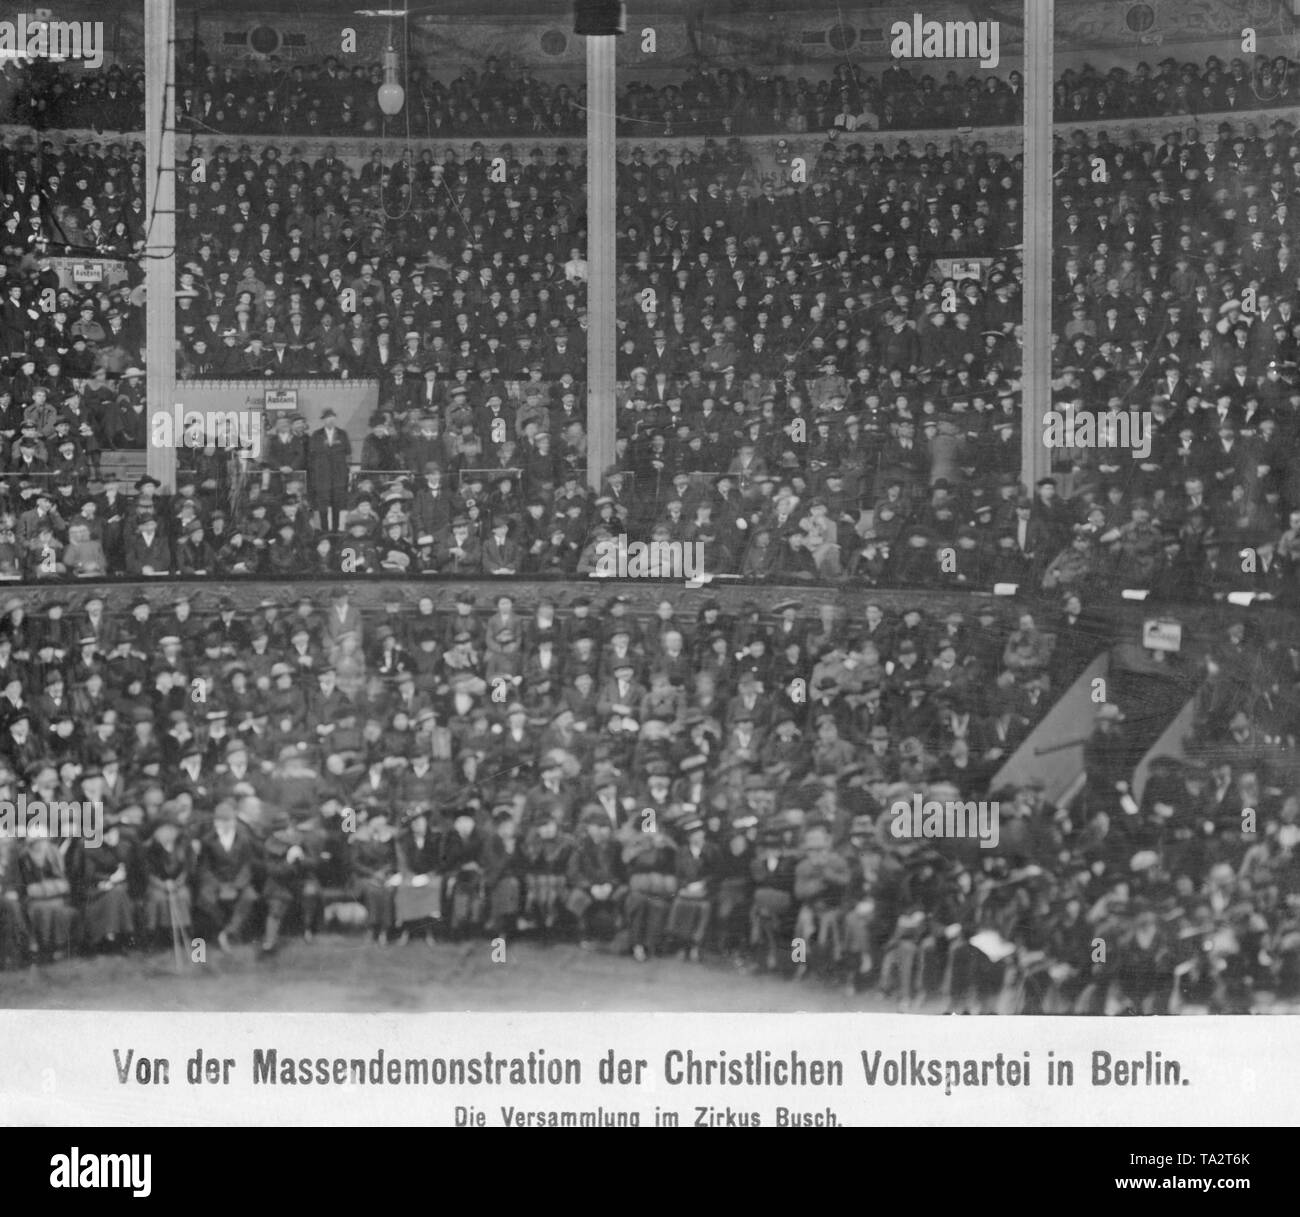 Supporters of the Centre Party, which at that time still bore the alternative name of Christliche Volkspartei (Christian People's Party) gather in Zirkus Busch Berlin. Stock Photo